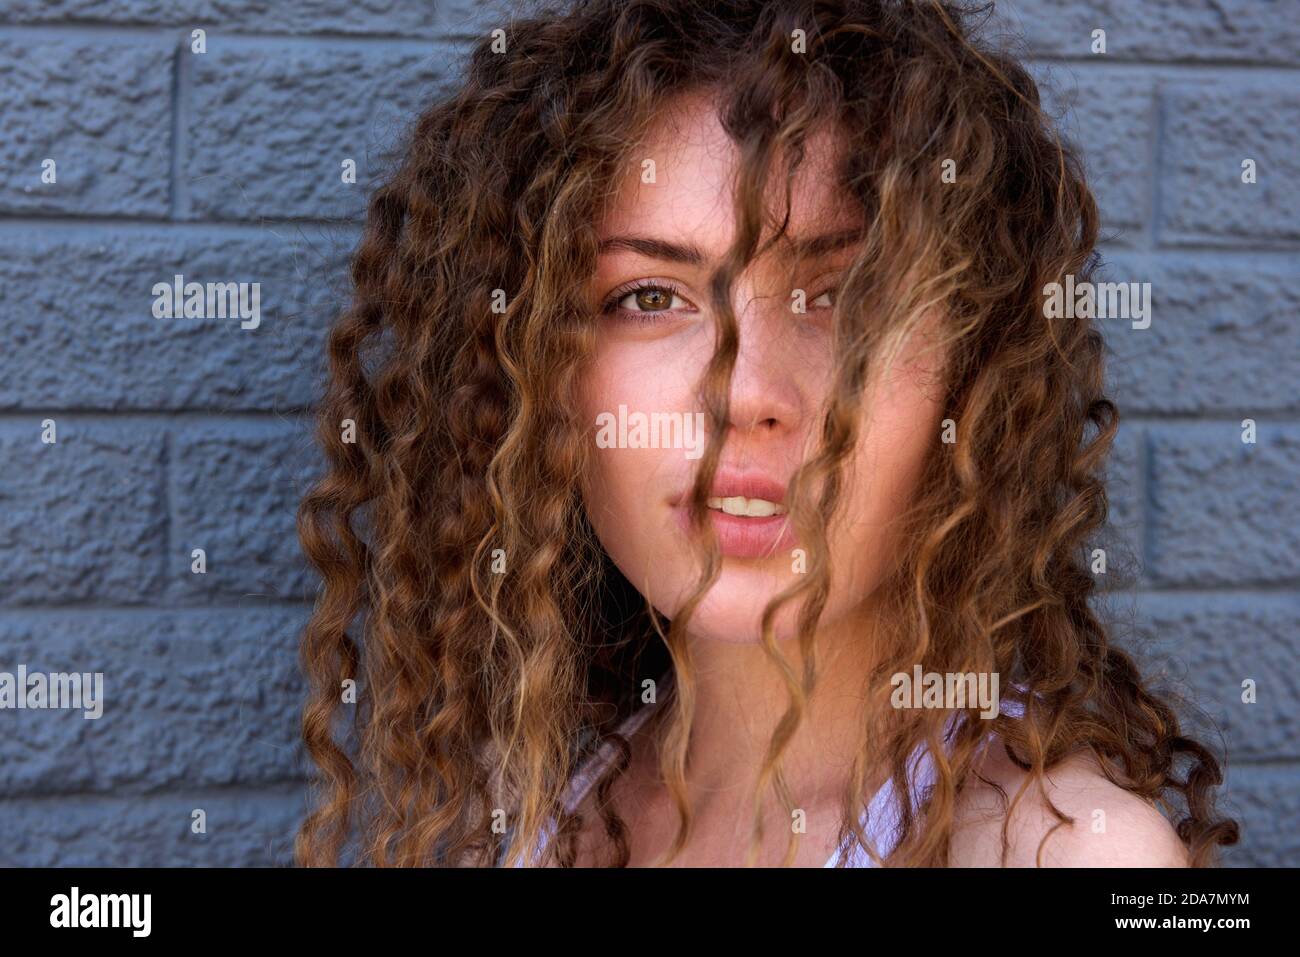 Close up portrait of beautiful young woman with hair in face staring Stock Photo